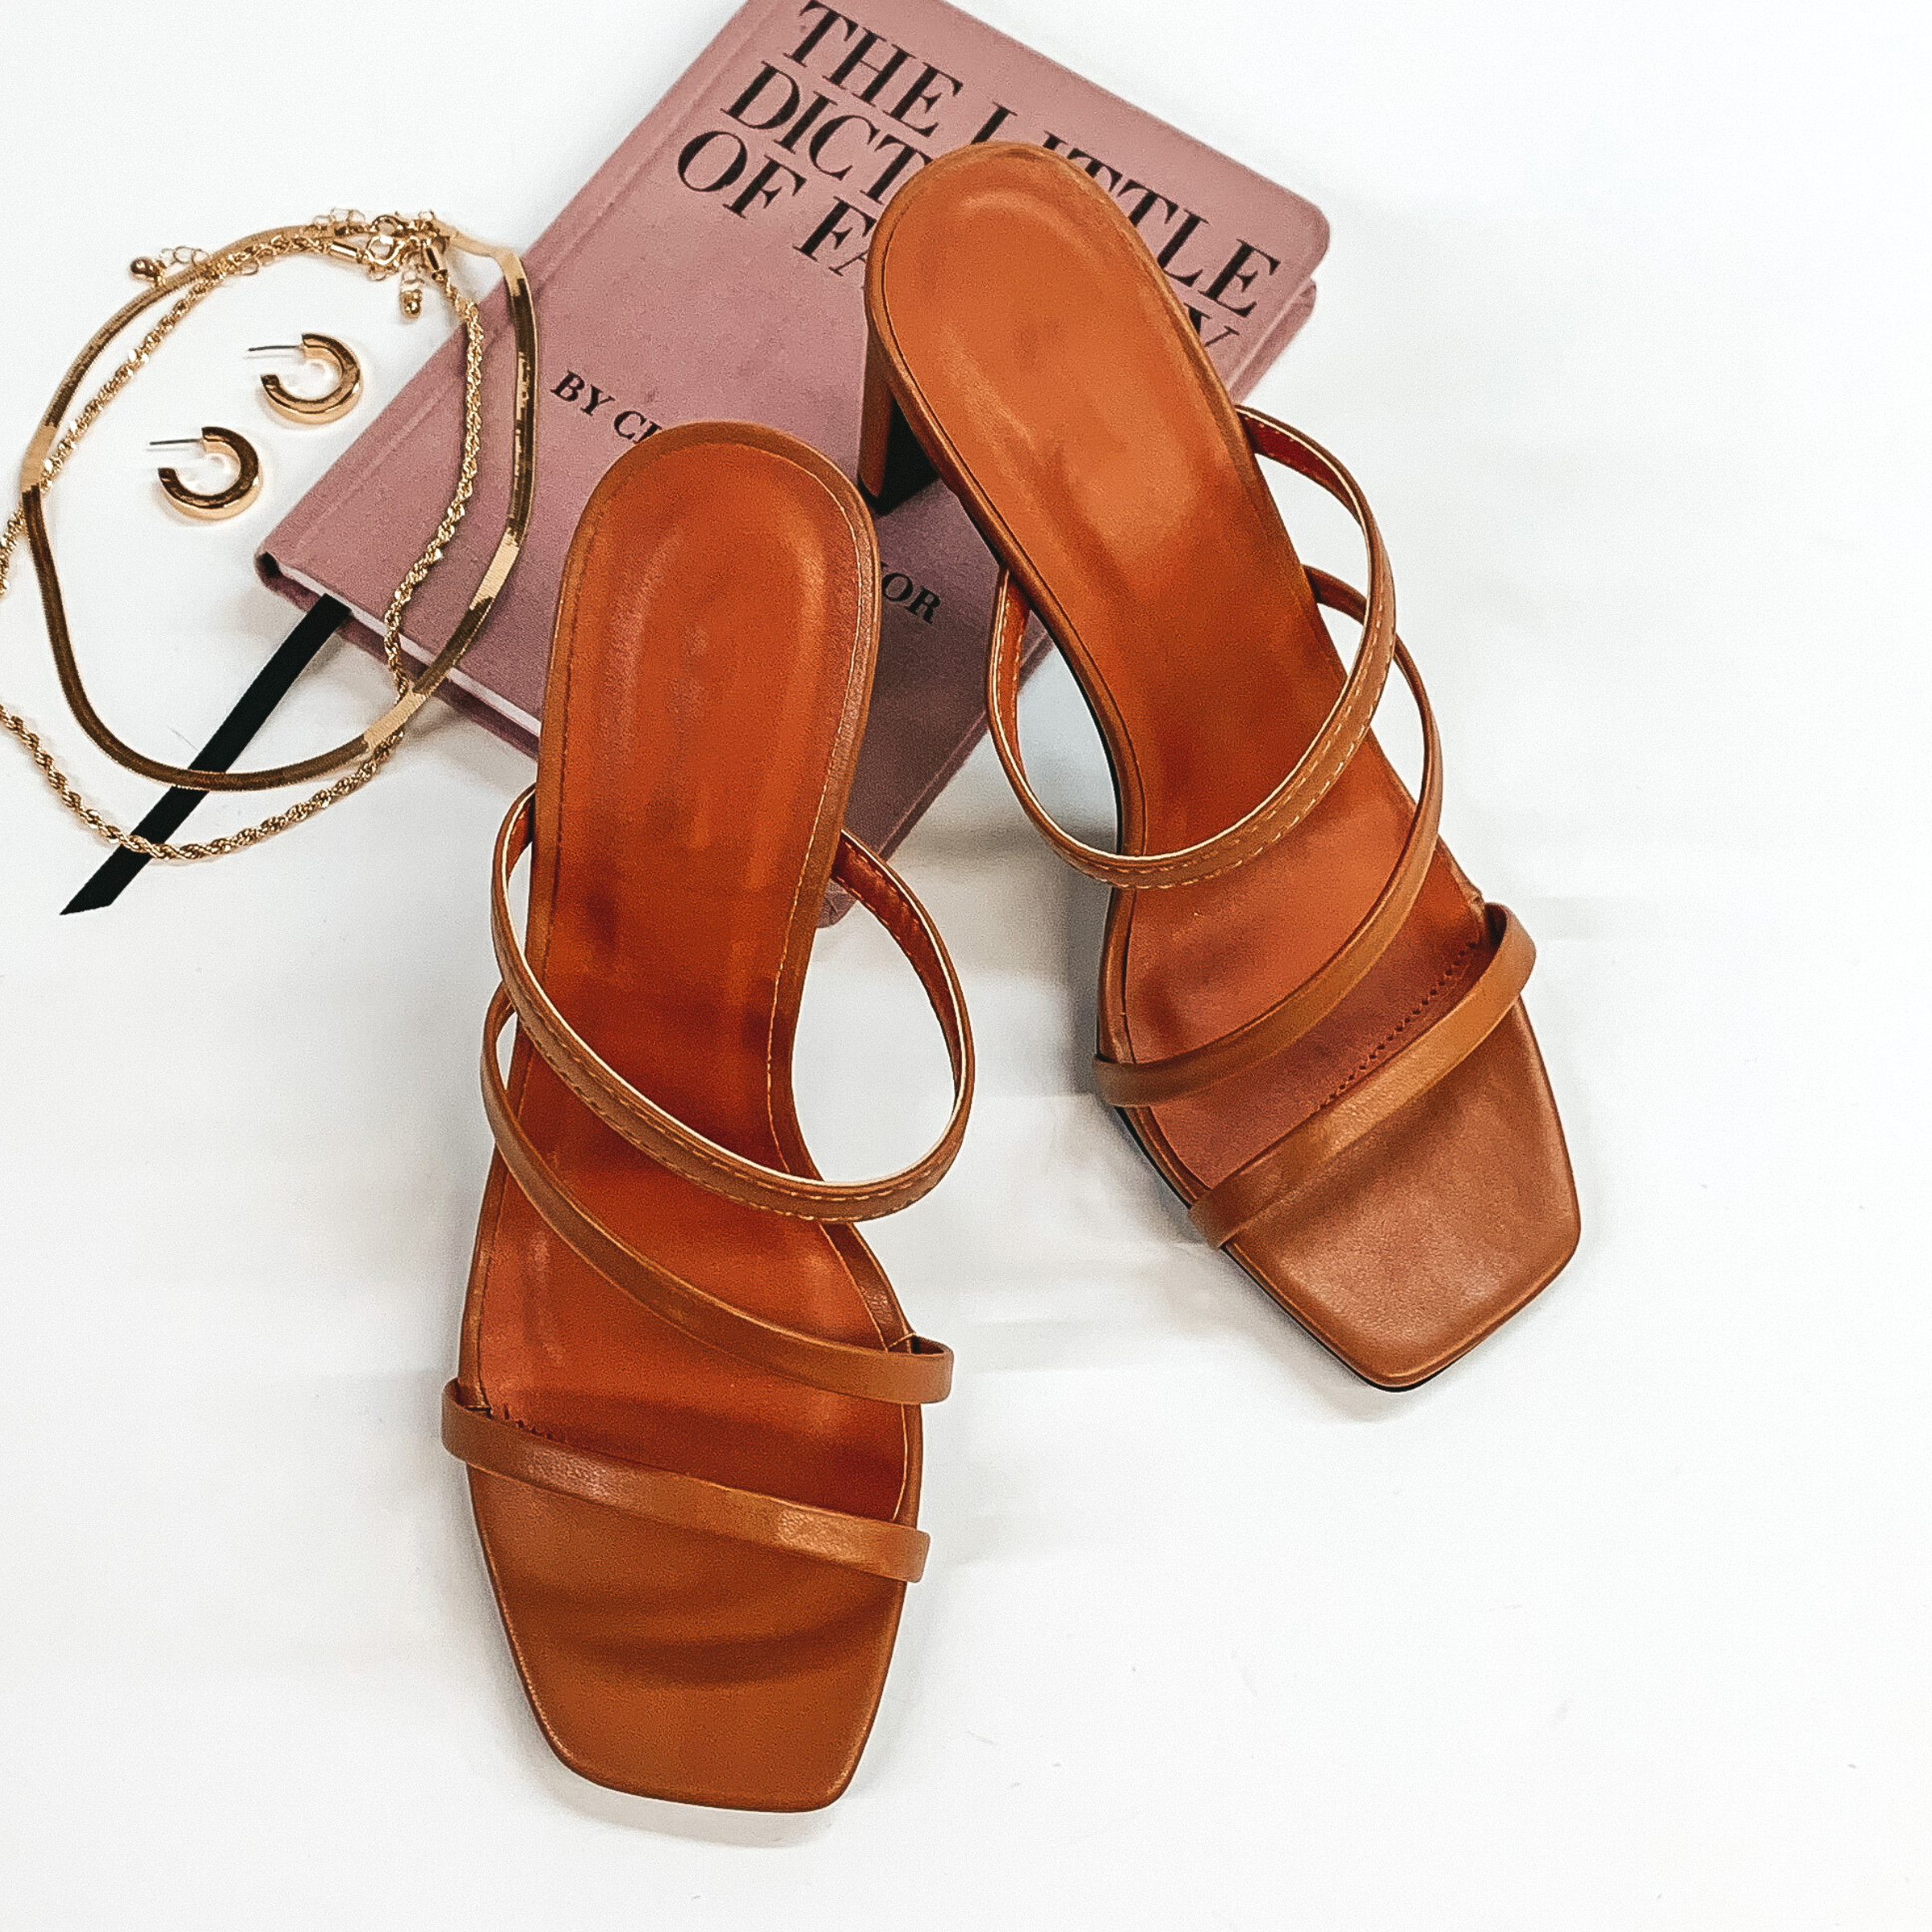 A pair of camel colored strappy heels that have a square toe. These shoes are pictured on a white background with gold jewelry and a book.